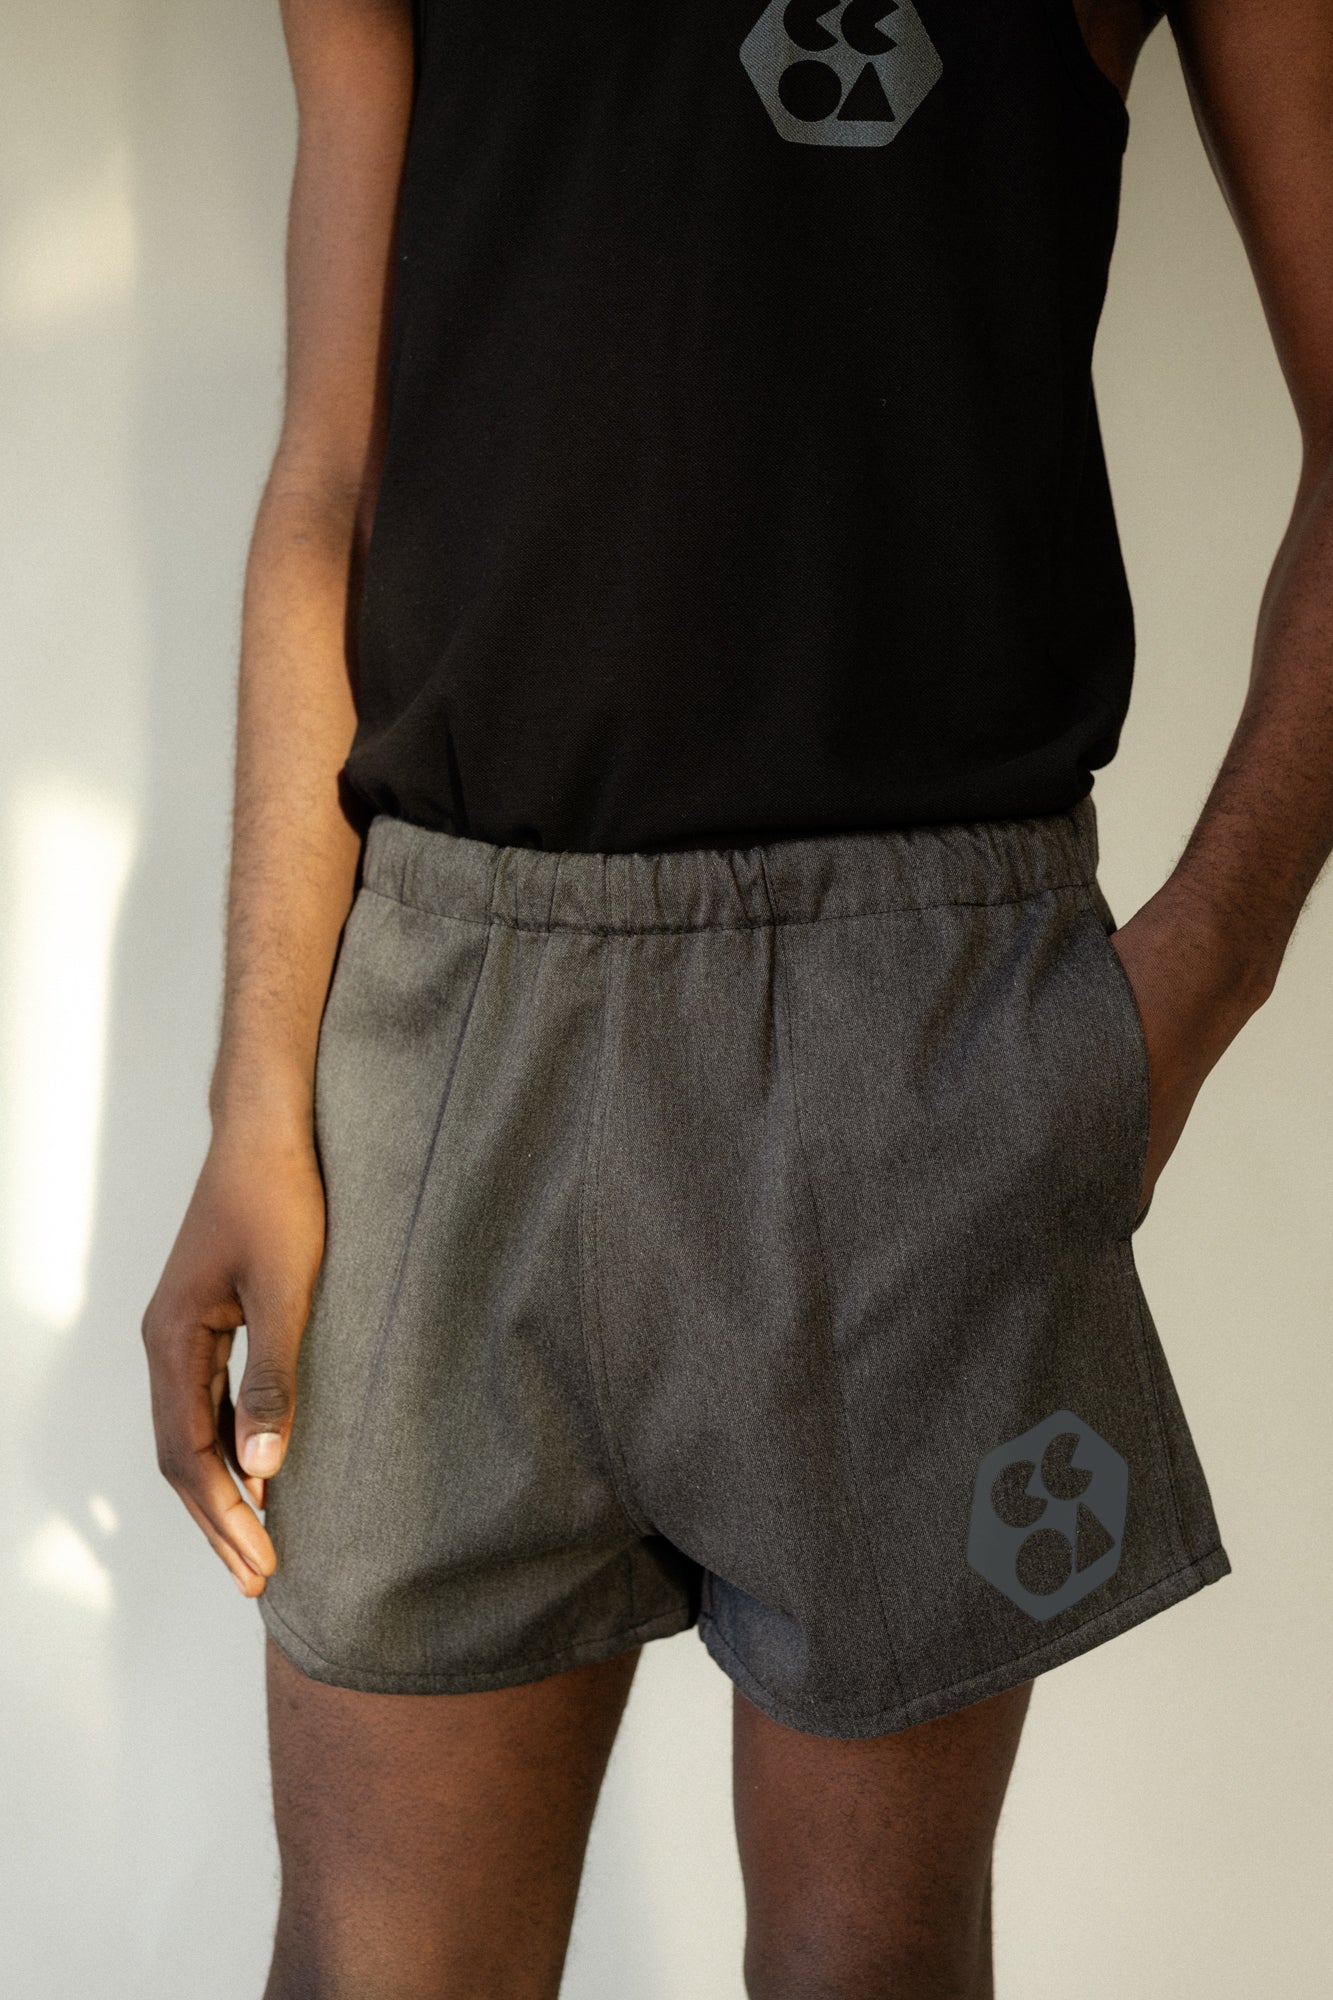 https://communityclothing.co.uk/cdn/shop/files/Male_Heavyweight-Sport-Short-Plastic-Free_Charcoal-Marl_Knee-To-Chest-Front_2048x.jpg?v=1705136677